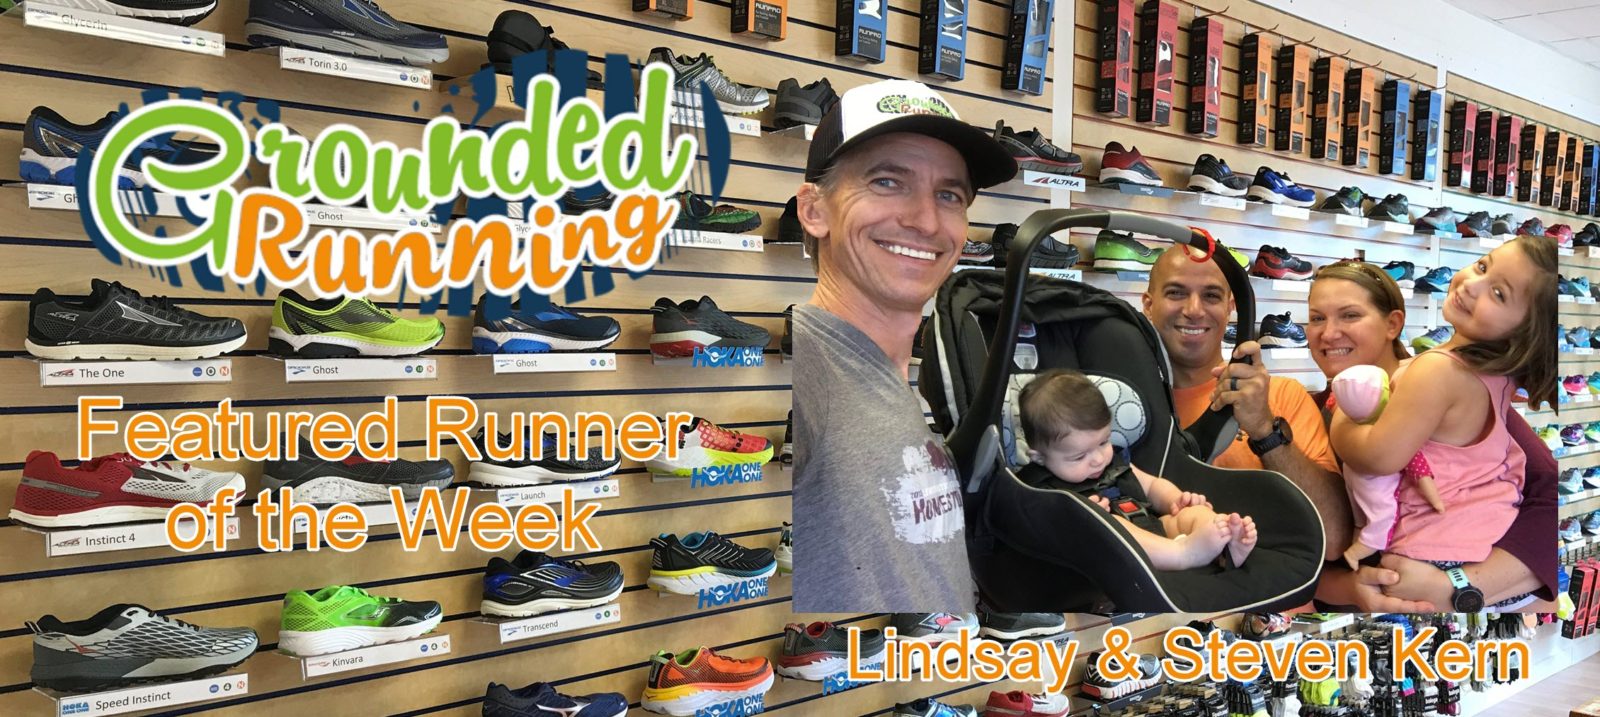 Lindsay & Steven Kern - Featured Runners of the Week - Grounded Running